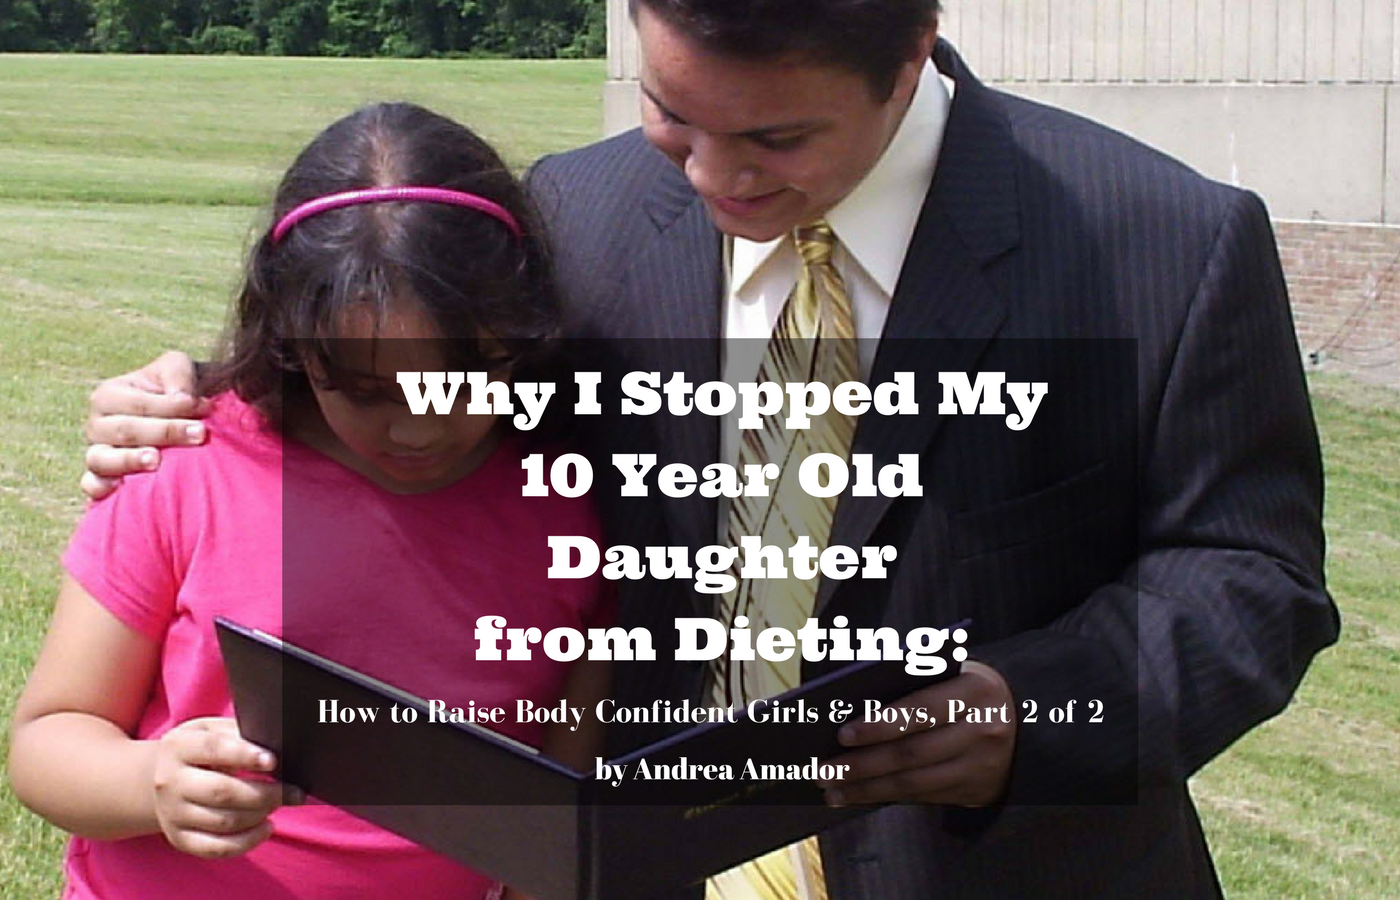 Why I Stopped My 10 Year Old Daughter from Dieting: How to Raise Body Confident Girls & Boys, Part 2 of 2